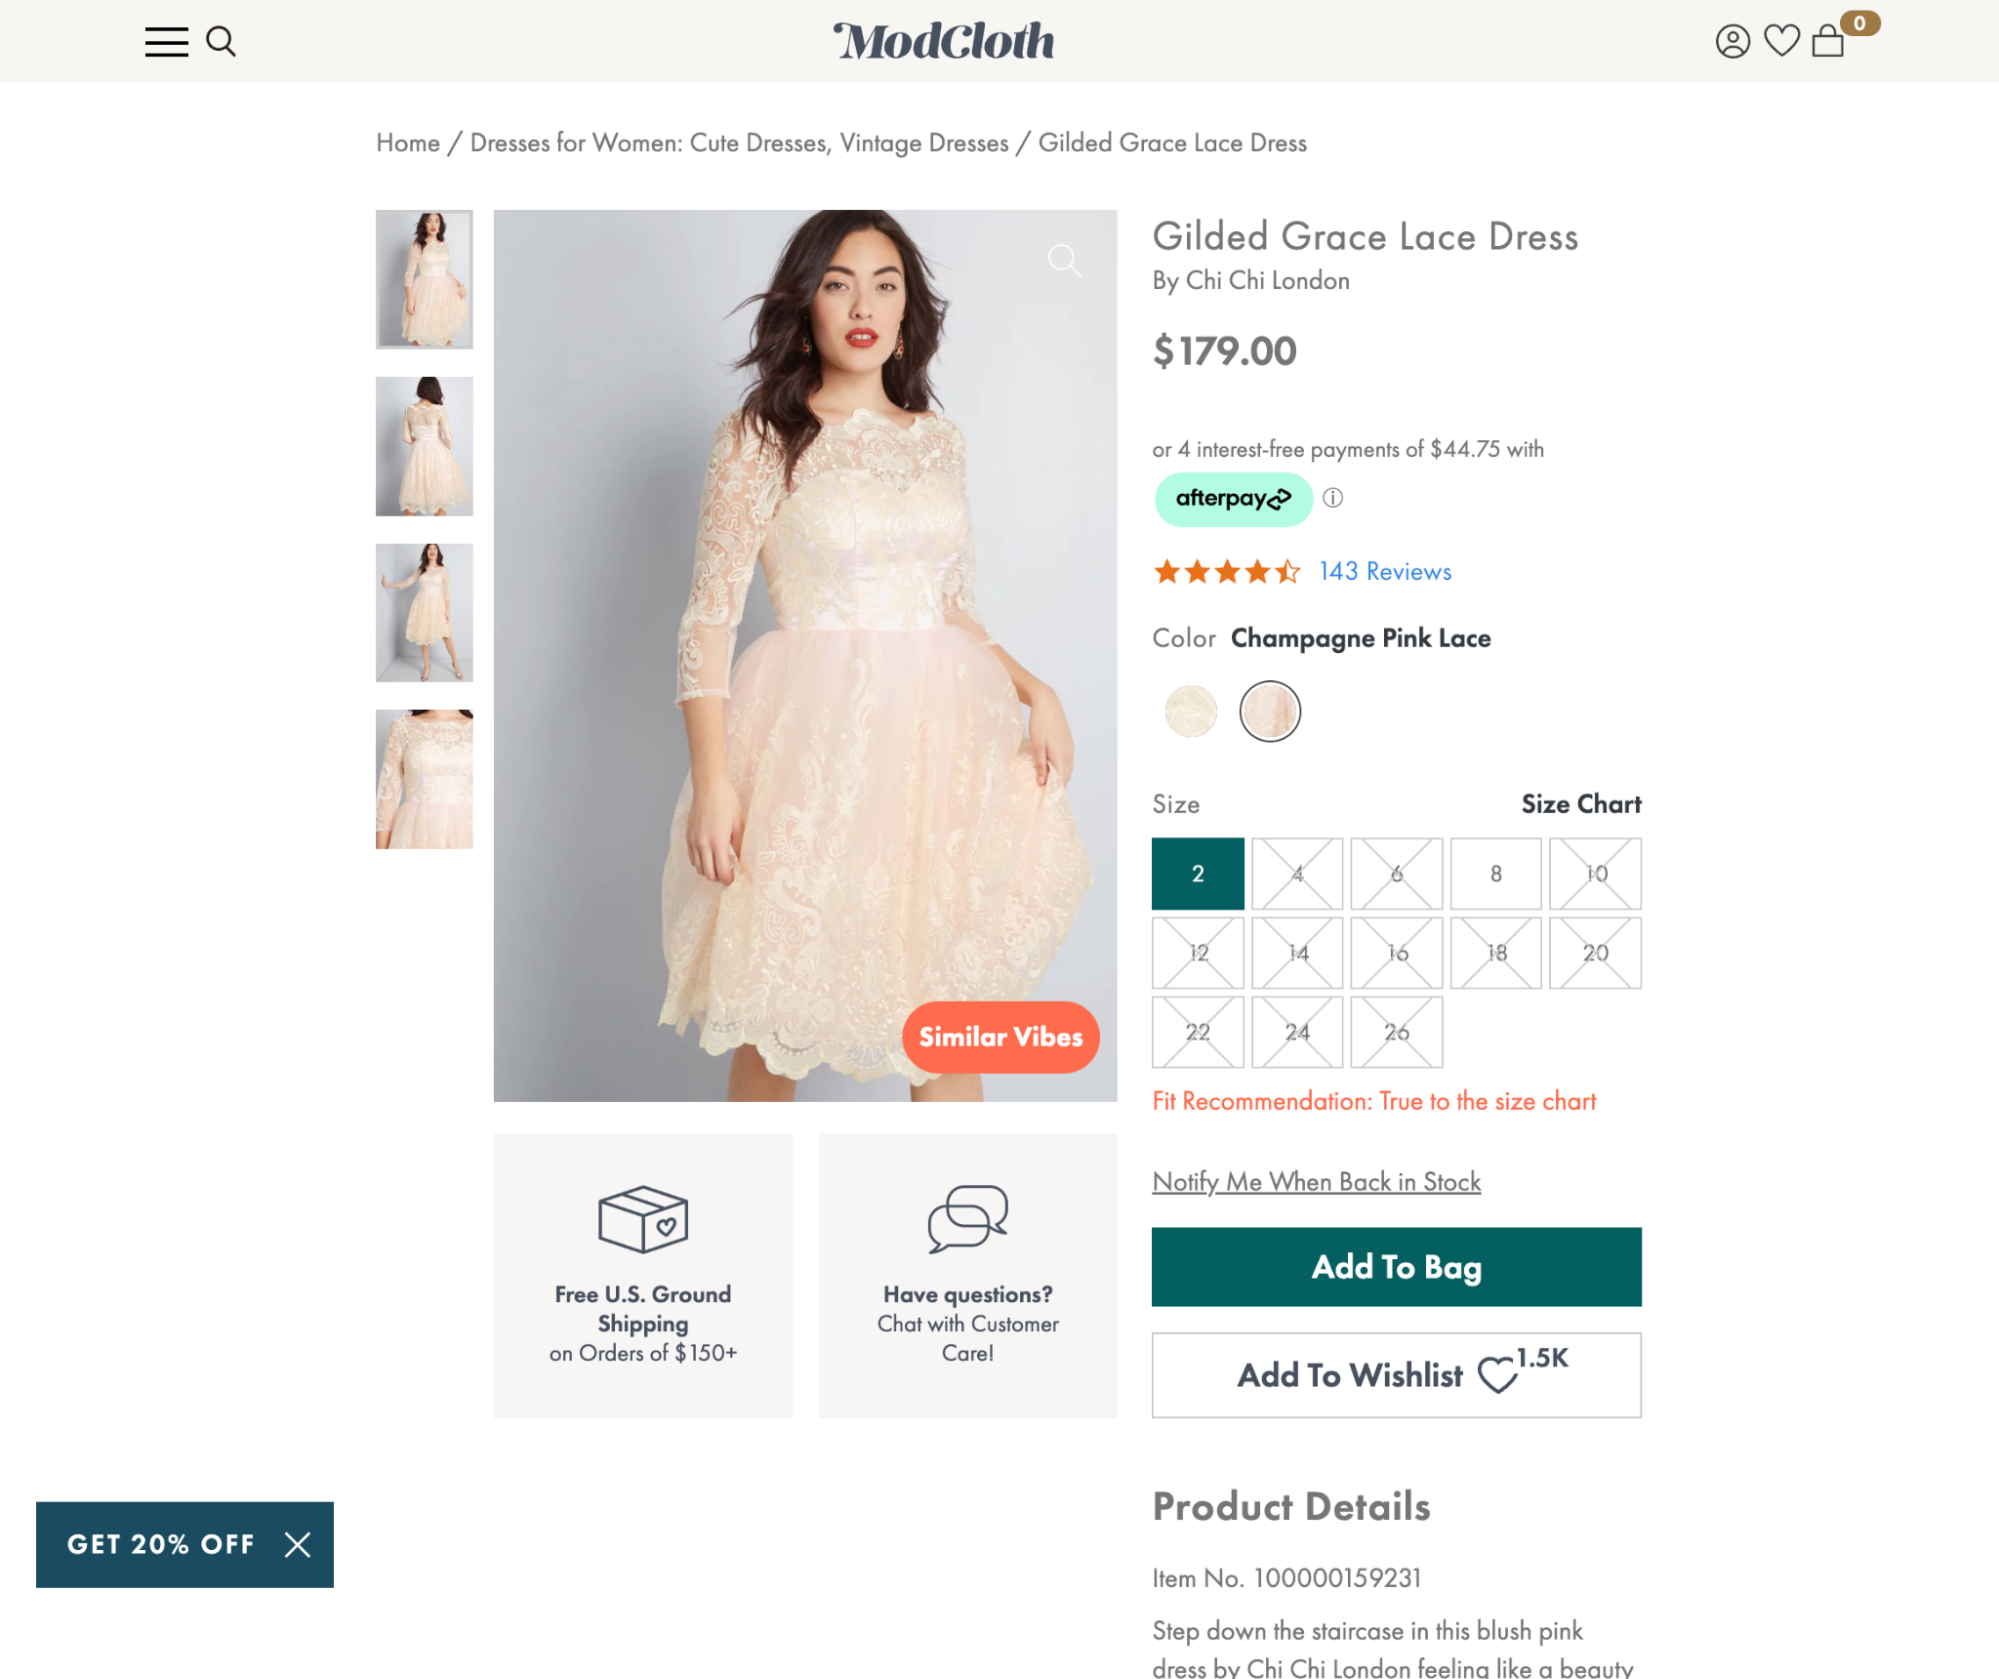 Modcloth uses social proof on product pages by sharing how many shoppers are interested.